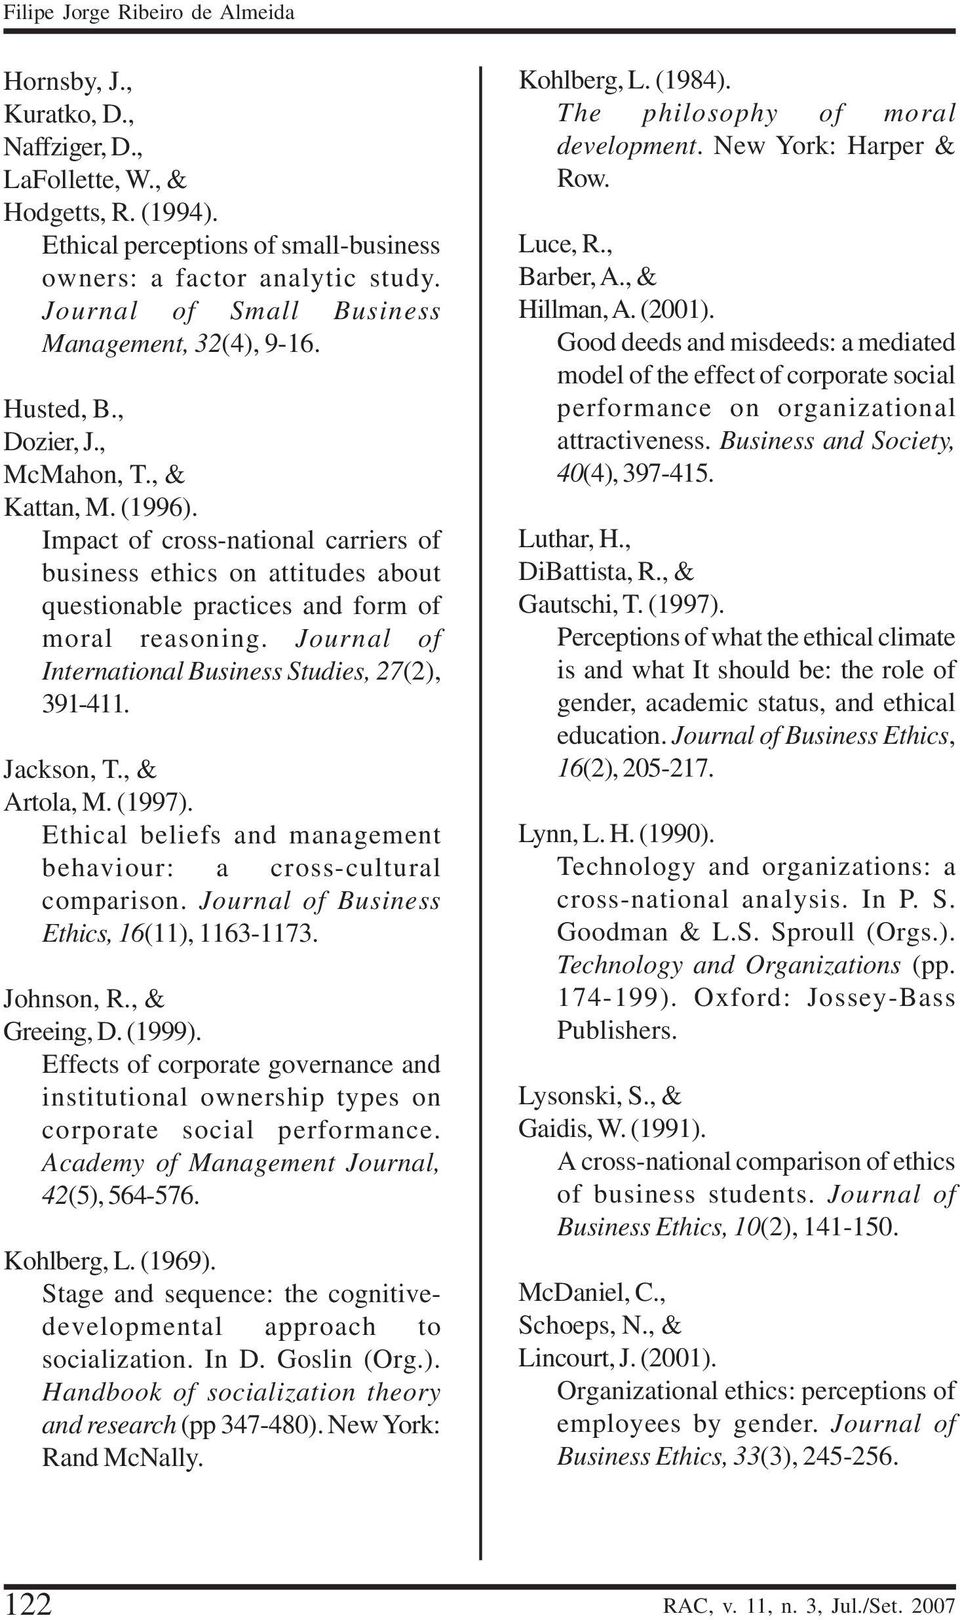 Impact of cross-national carriers of business ethics on attitudes about questionable practices and form of moral reasoning. Journal of International Business Studies, 27(2), 391-411. Jackson, T.